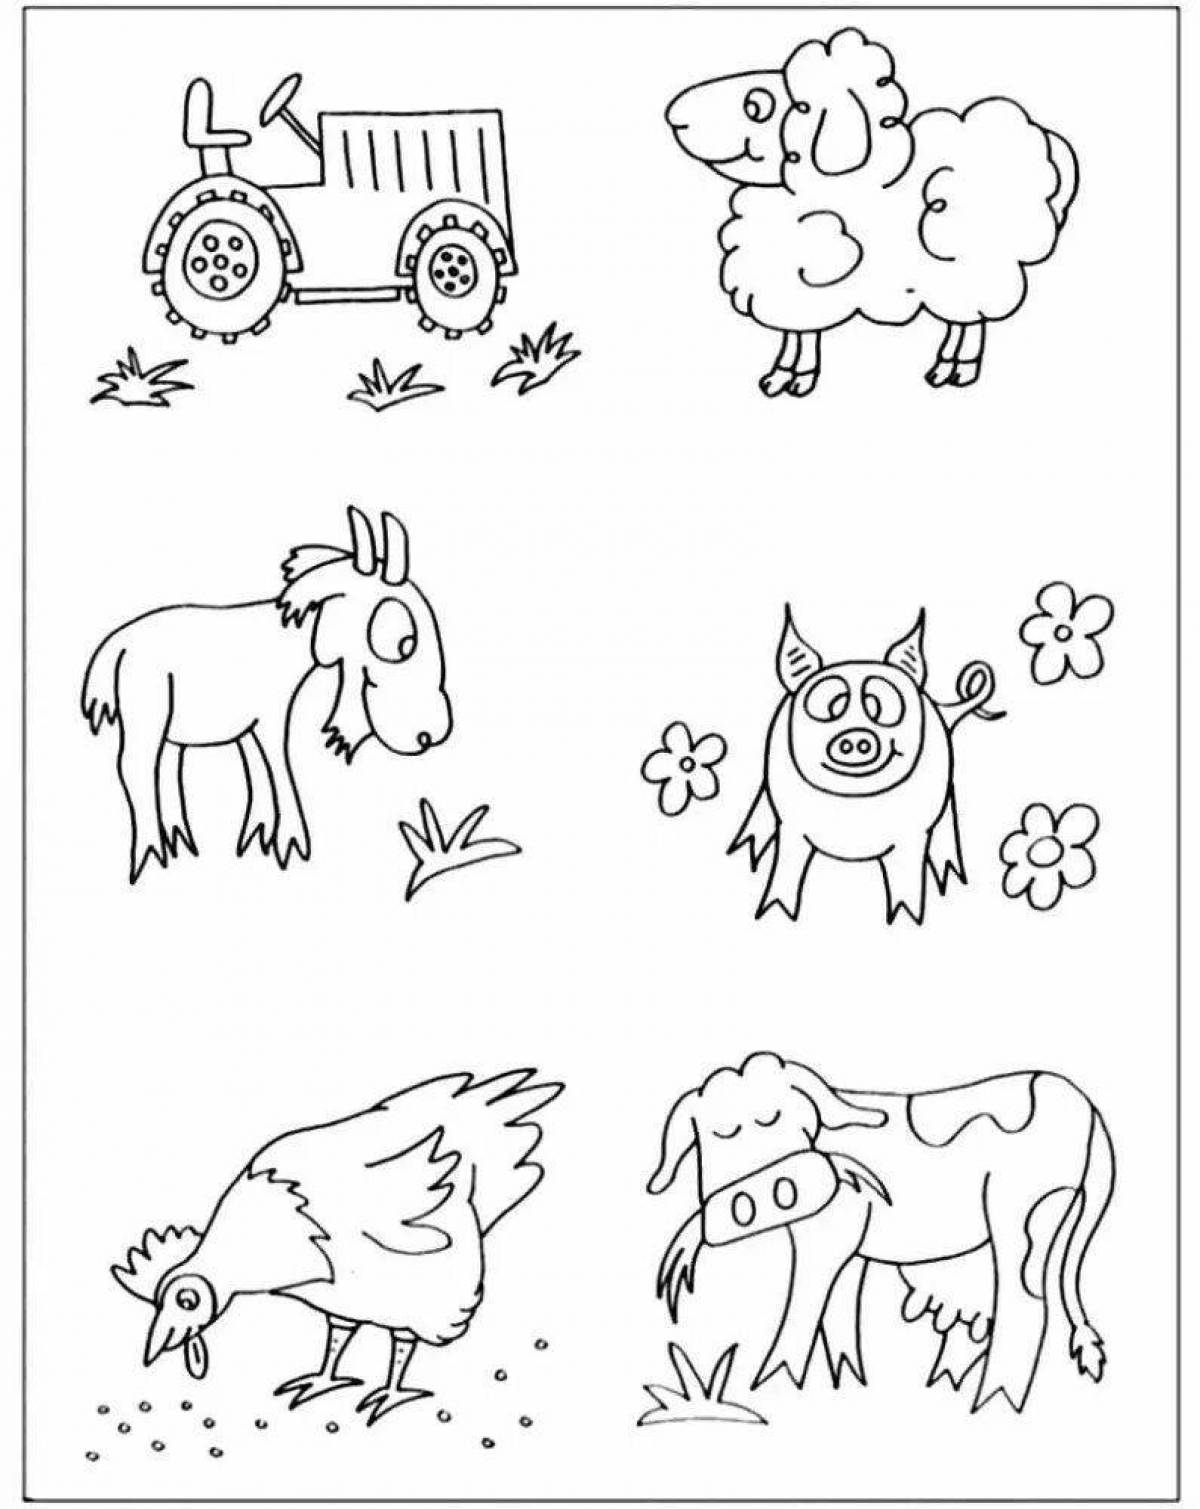 Animated coloring book for preschool pets